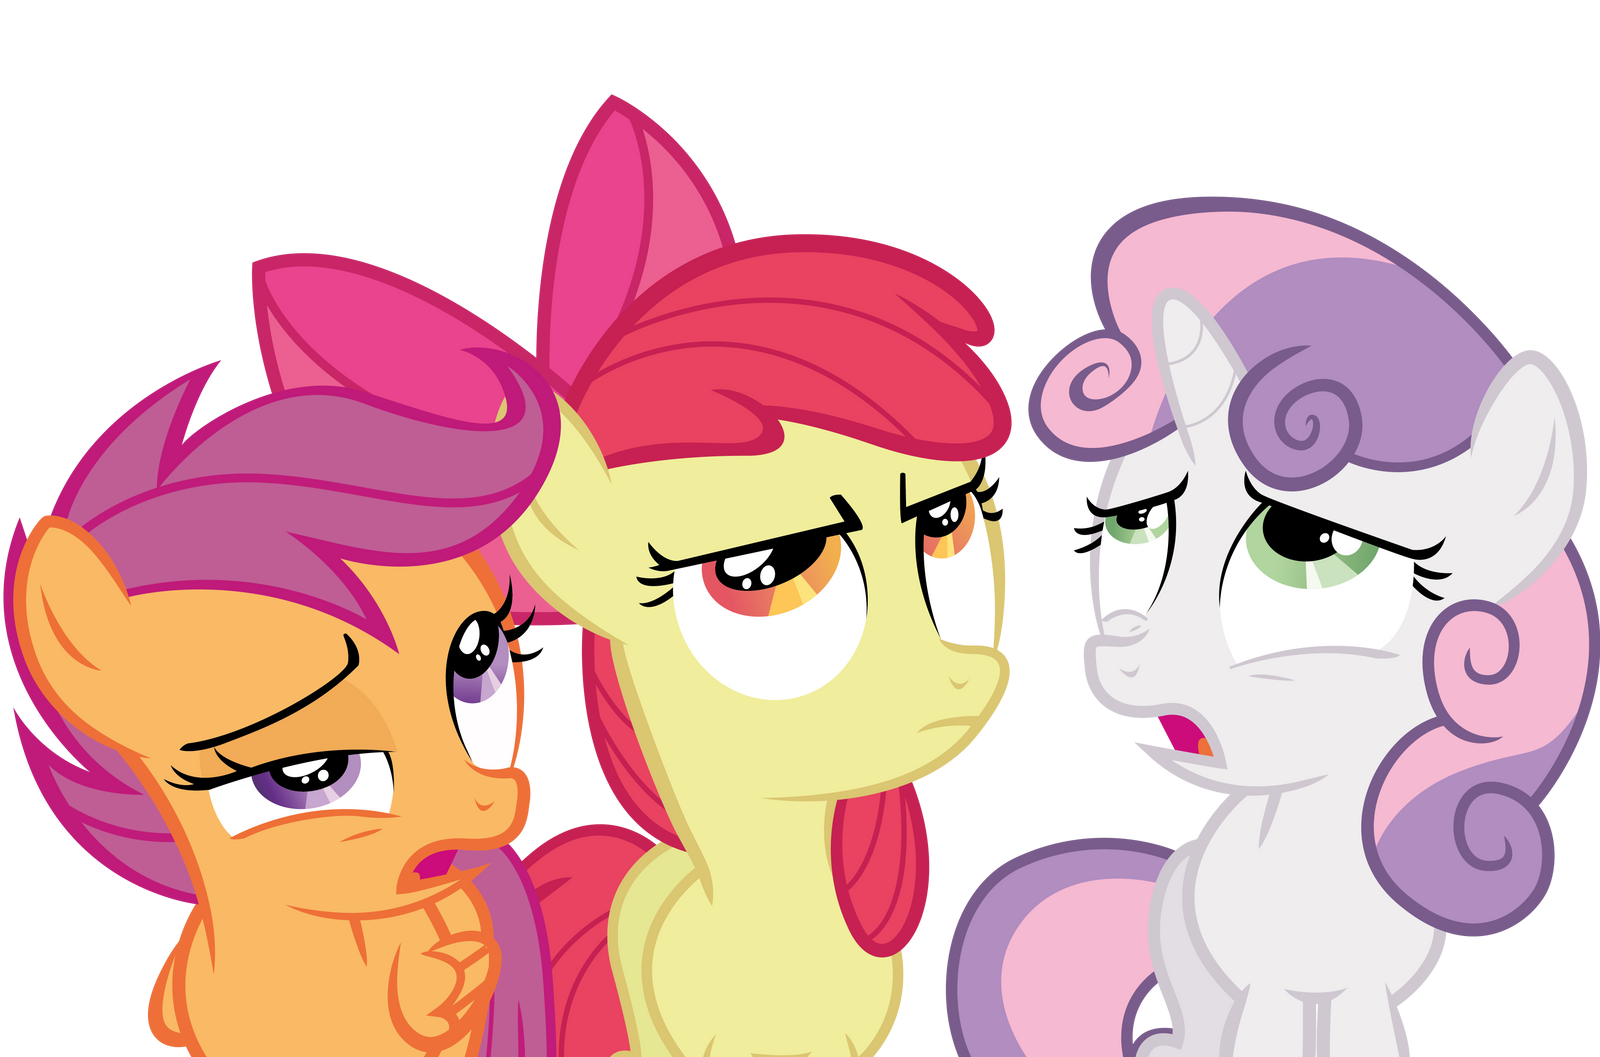 http://fc03.deviantart.net/fs70/i/2012/250/7/0/cutie_mark_crusaders_discover_the_internet_by_the_crusius-d5dwvnn.png